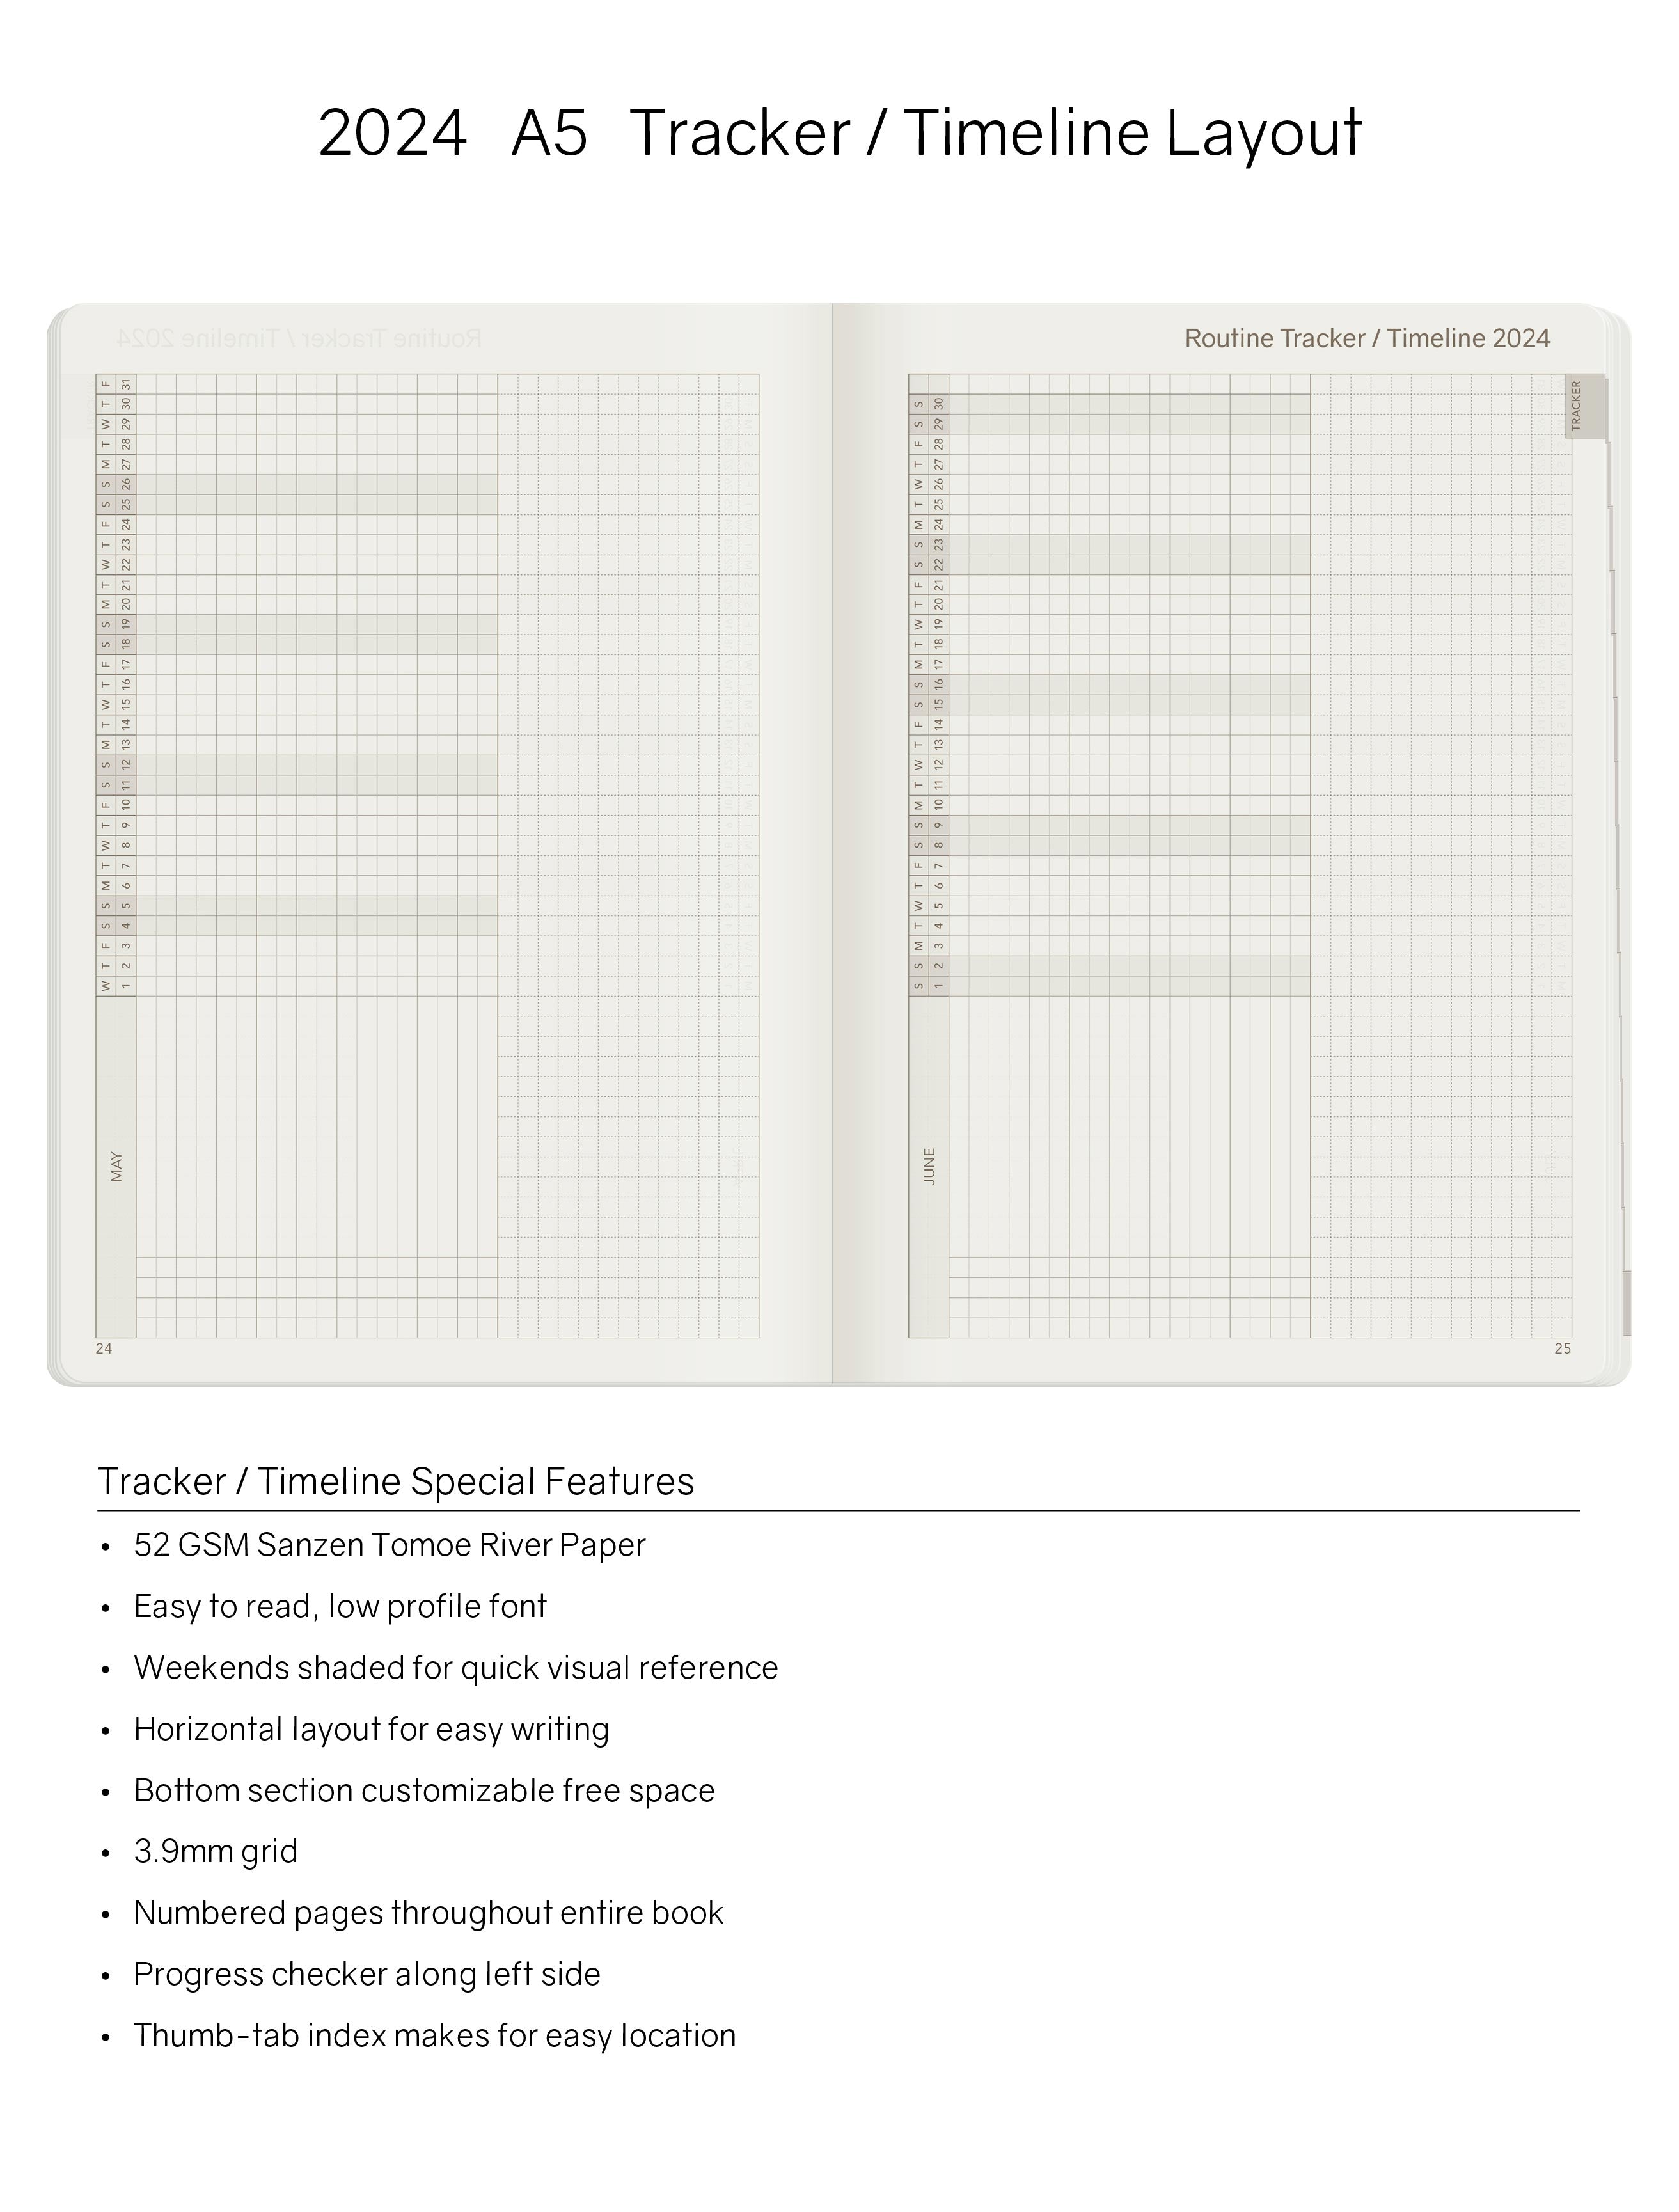 2024 A5 Weekly Planner (Stacked Weekends) -Alpine Lake (Blue)  52gsm Tomoe River Paper